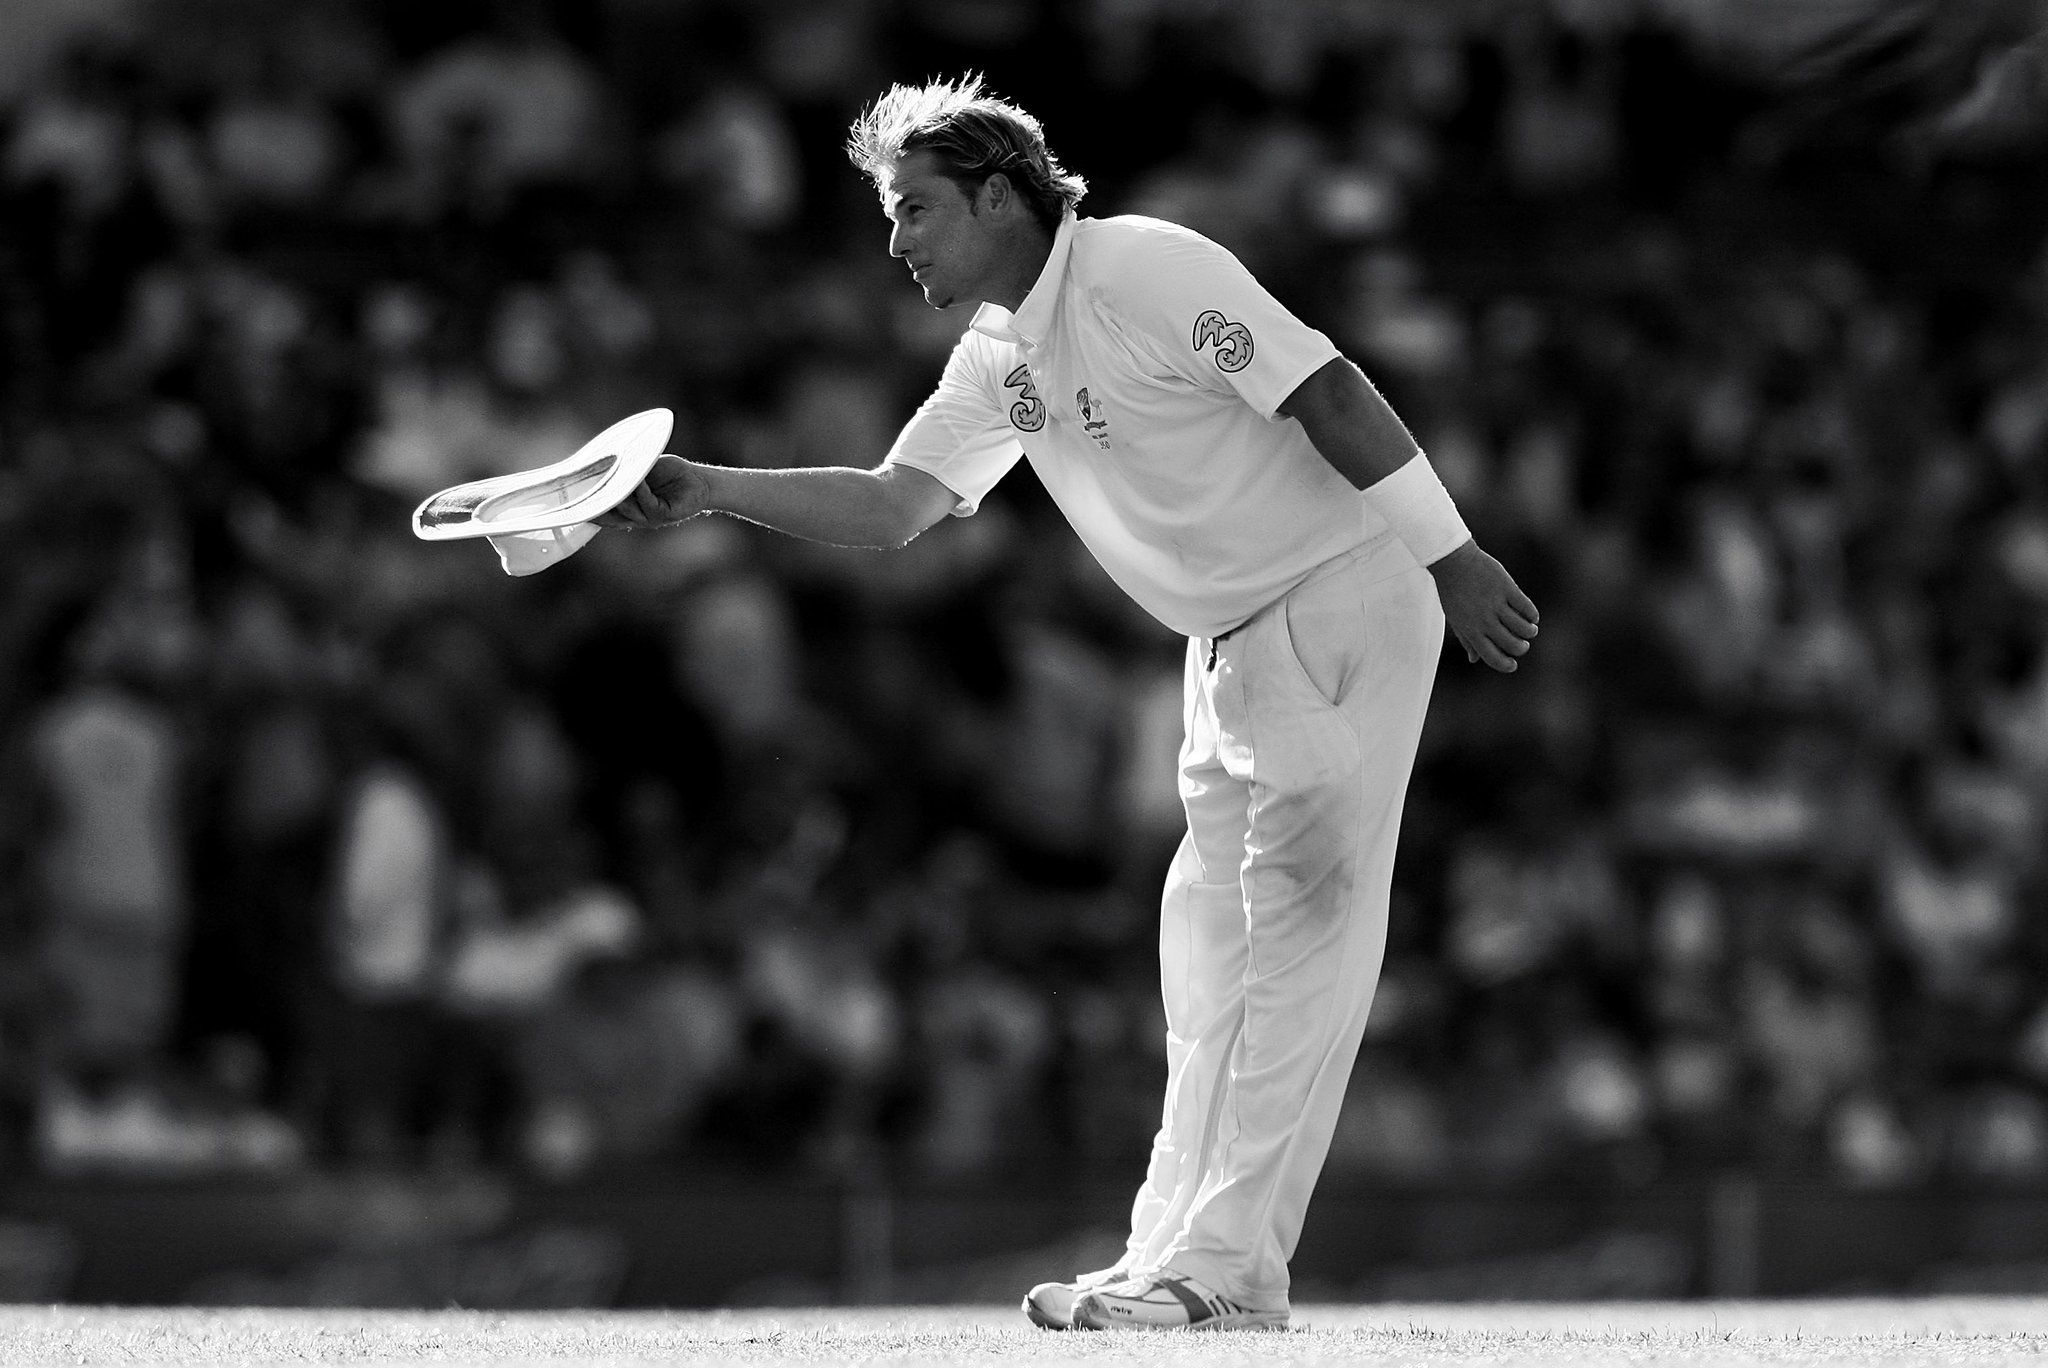 Shane Warne: The man who breathed life into dying art of leg-spin